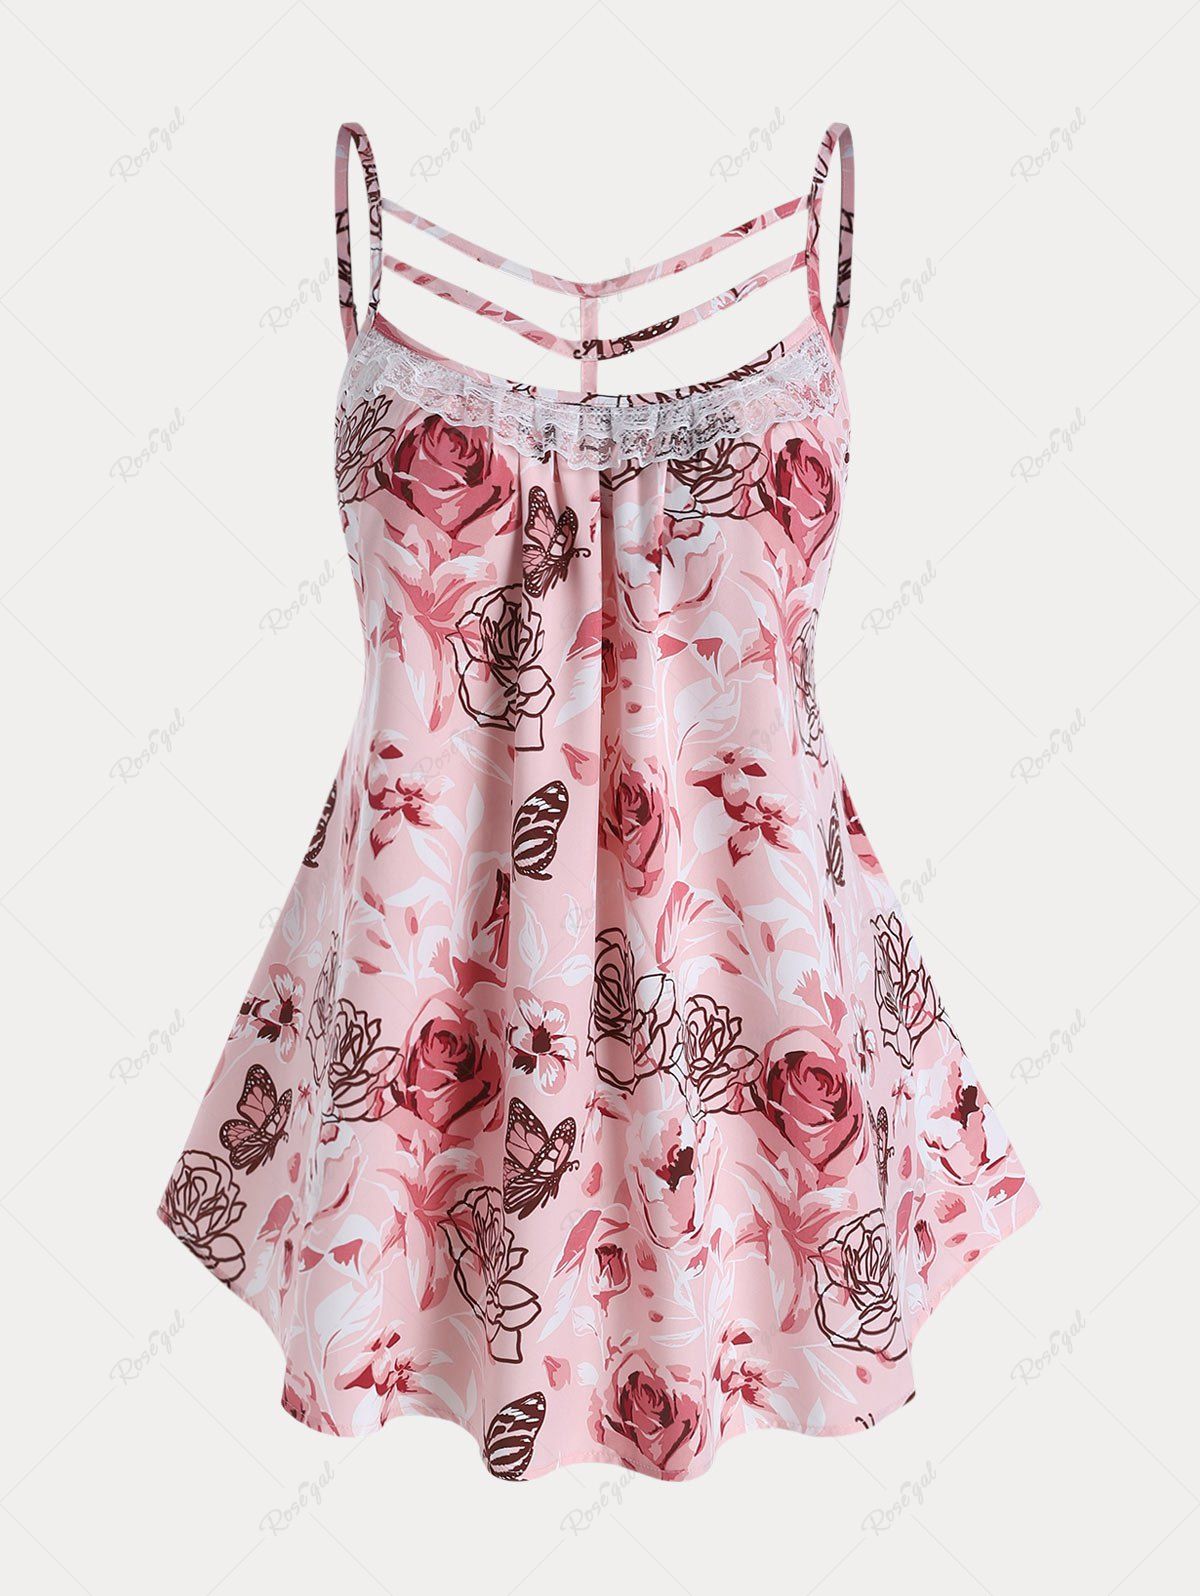 Hot Plus Size & Curve Floral Backless Strappy Lace Panel Cami Top  